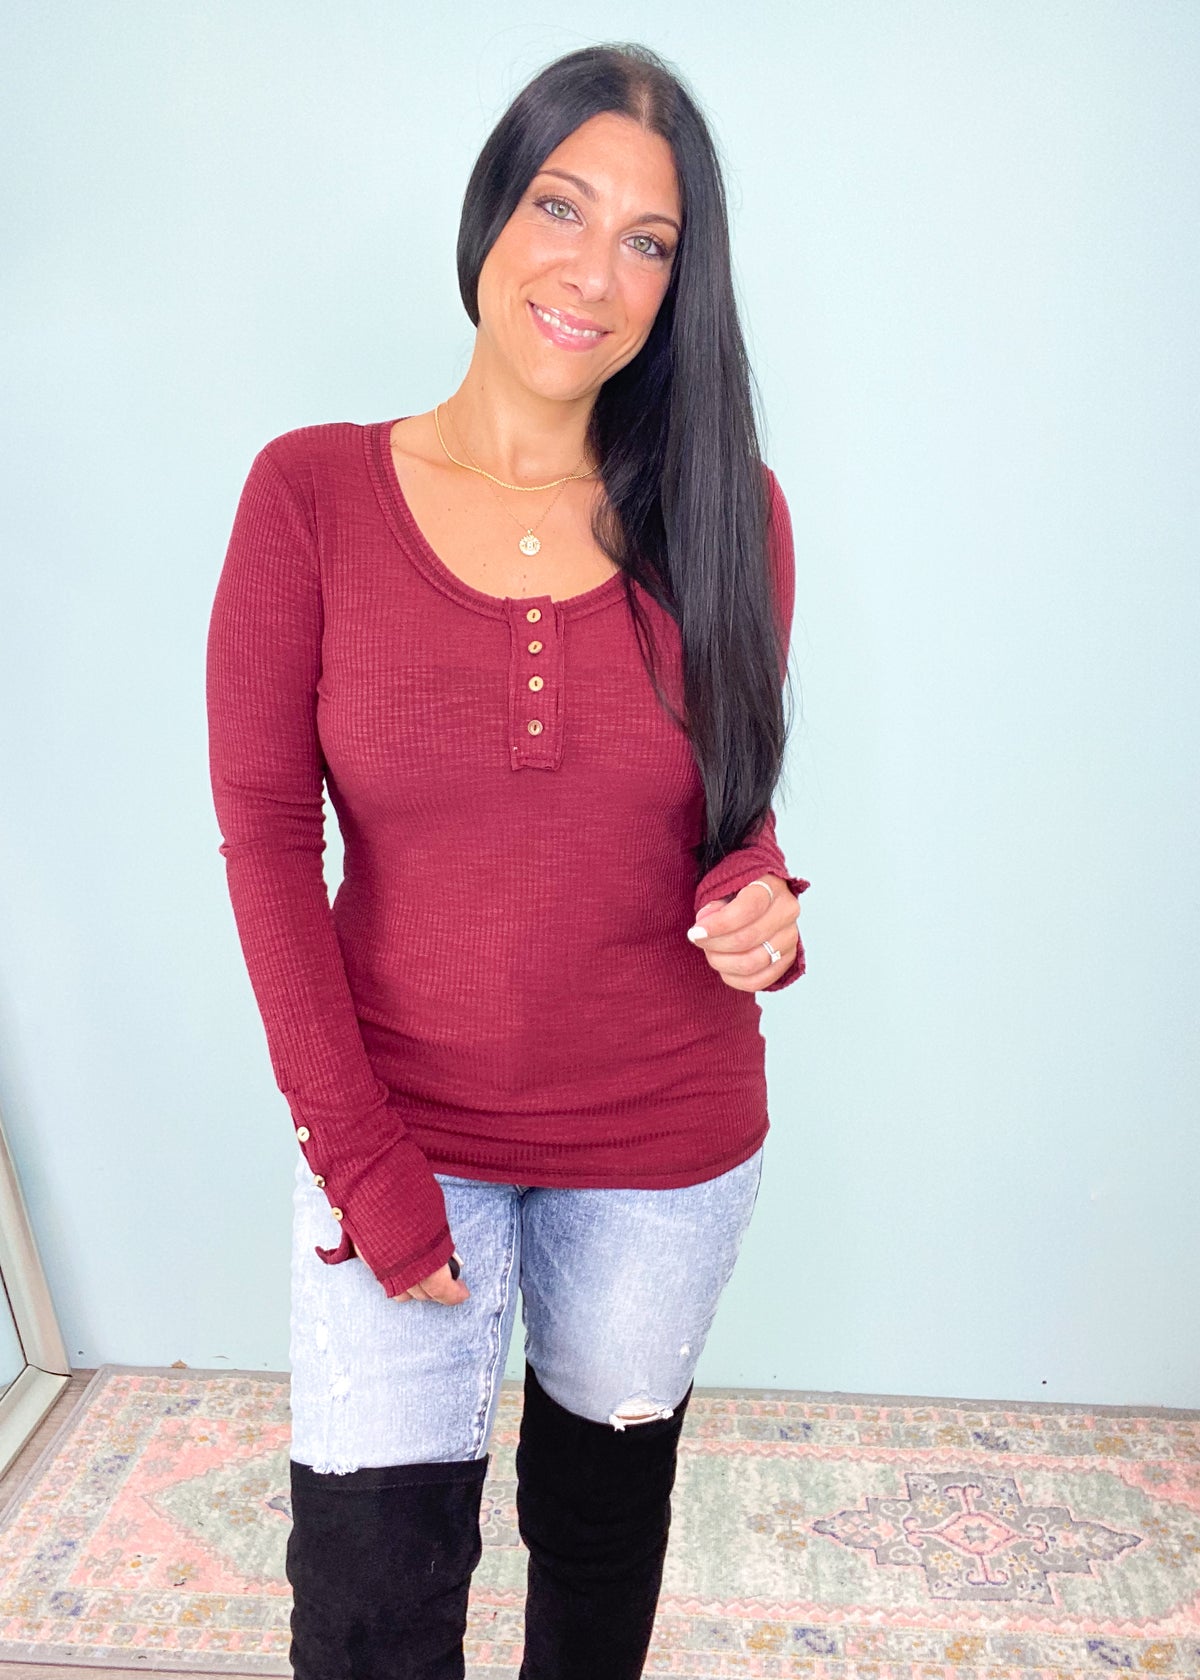 'Lee' Deep Burgundy Ribbed Henley Top-This ribbed fitted top is a perfect layering piece for all your Fall outfits and looks just as cute on it's own. It has lots of details making it an elevated basic. The gorgeous rich deep burgundy color is perfect for cooler days ahead and pairs well with all the Fall neutrals! -Cali Moon Boutique, Plainville Connecticut